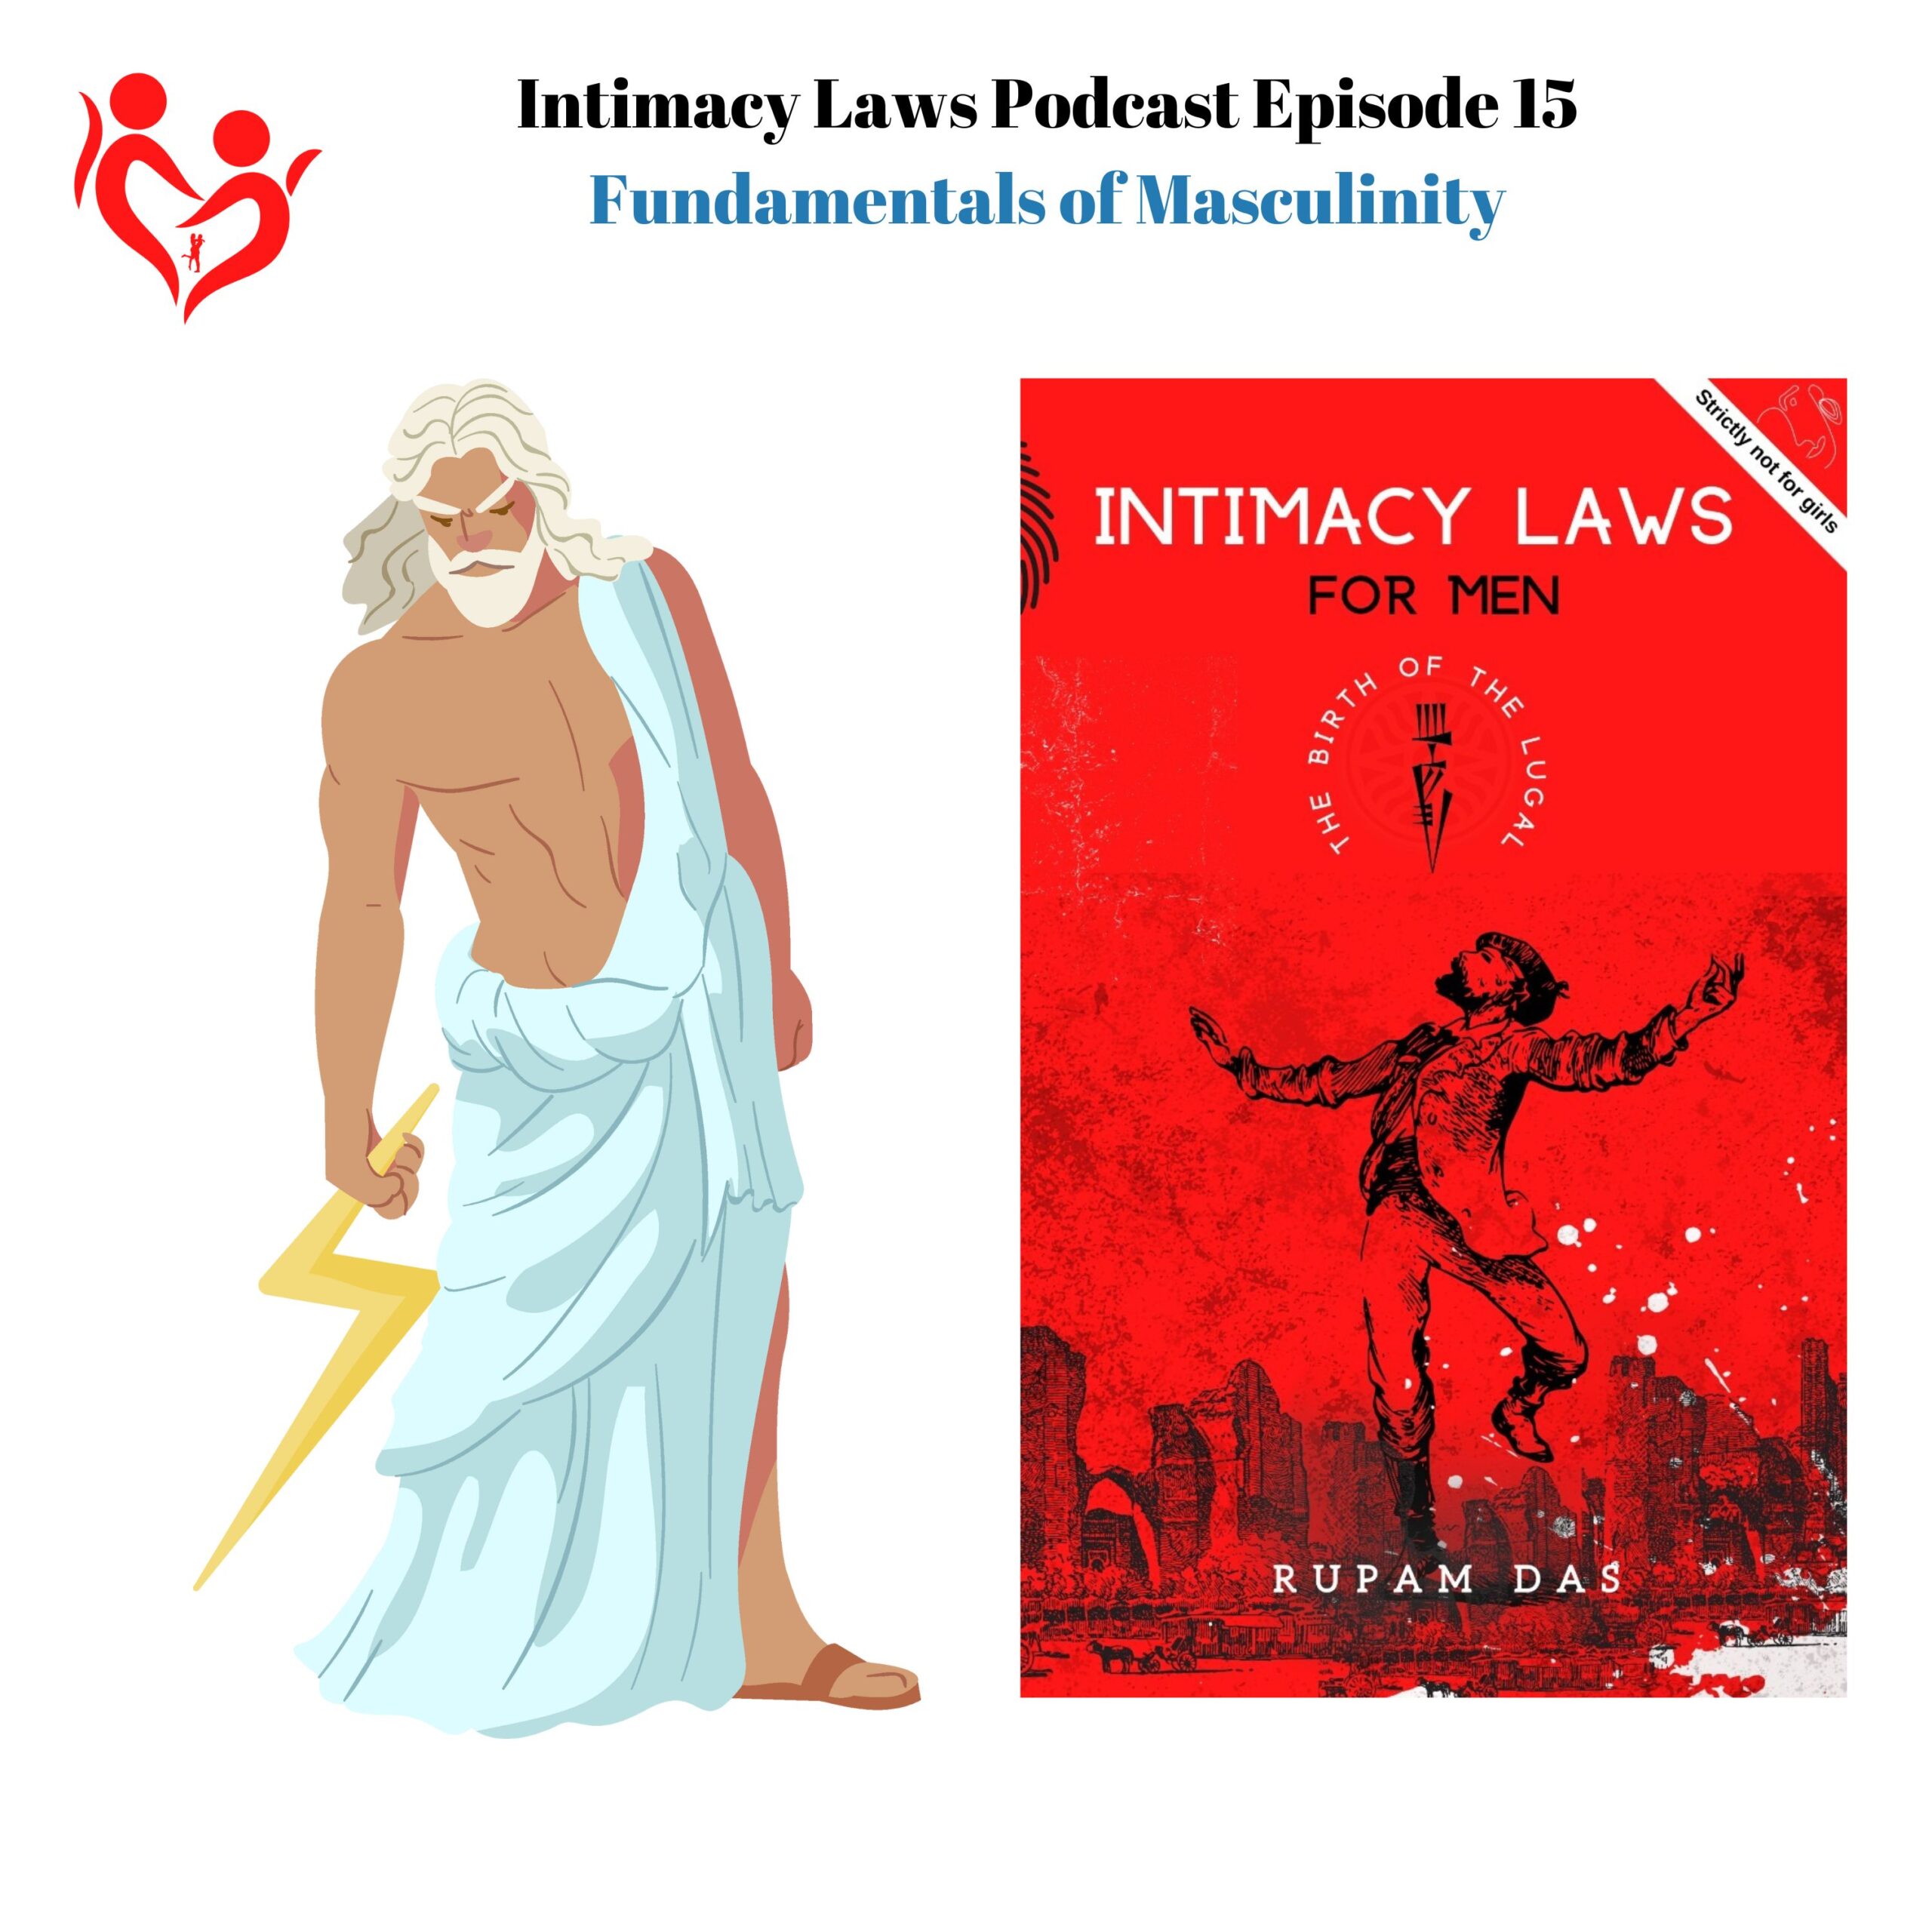 Intimacy Laws for Men Podcast Episode 15 Fundamentals of Masculinity